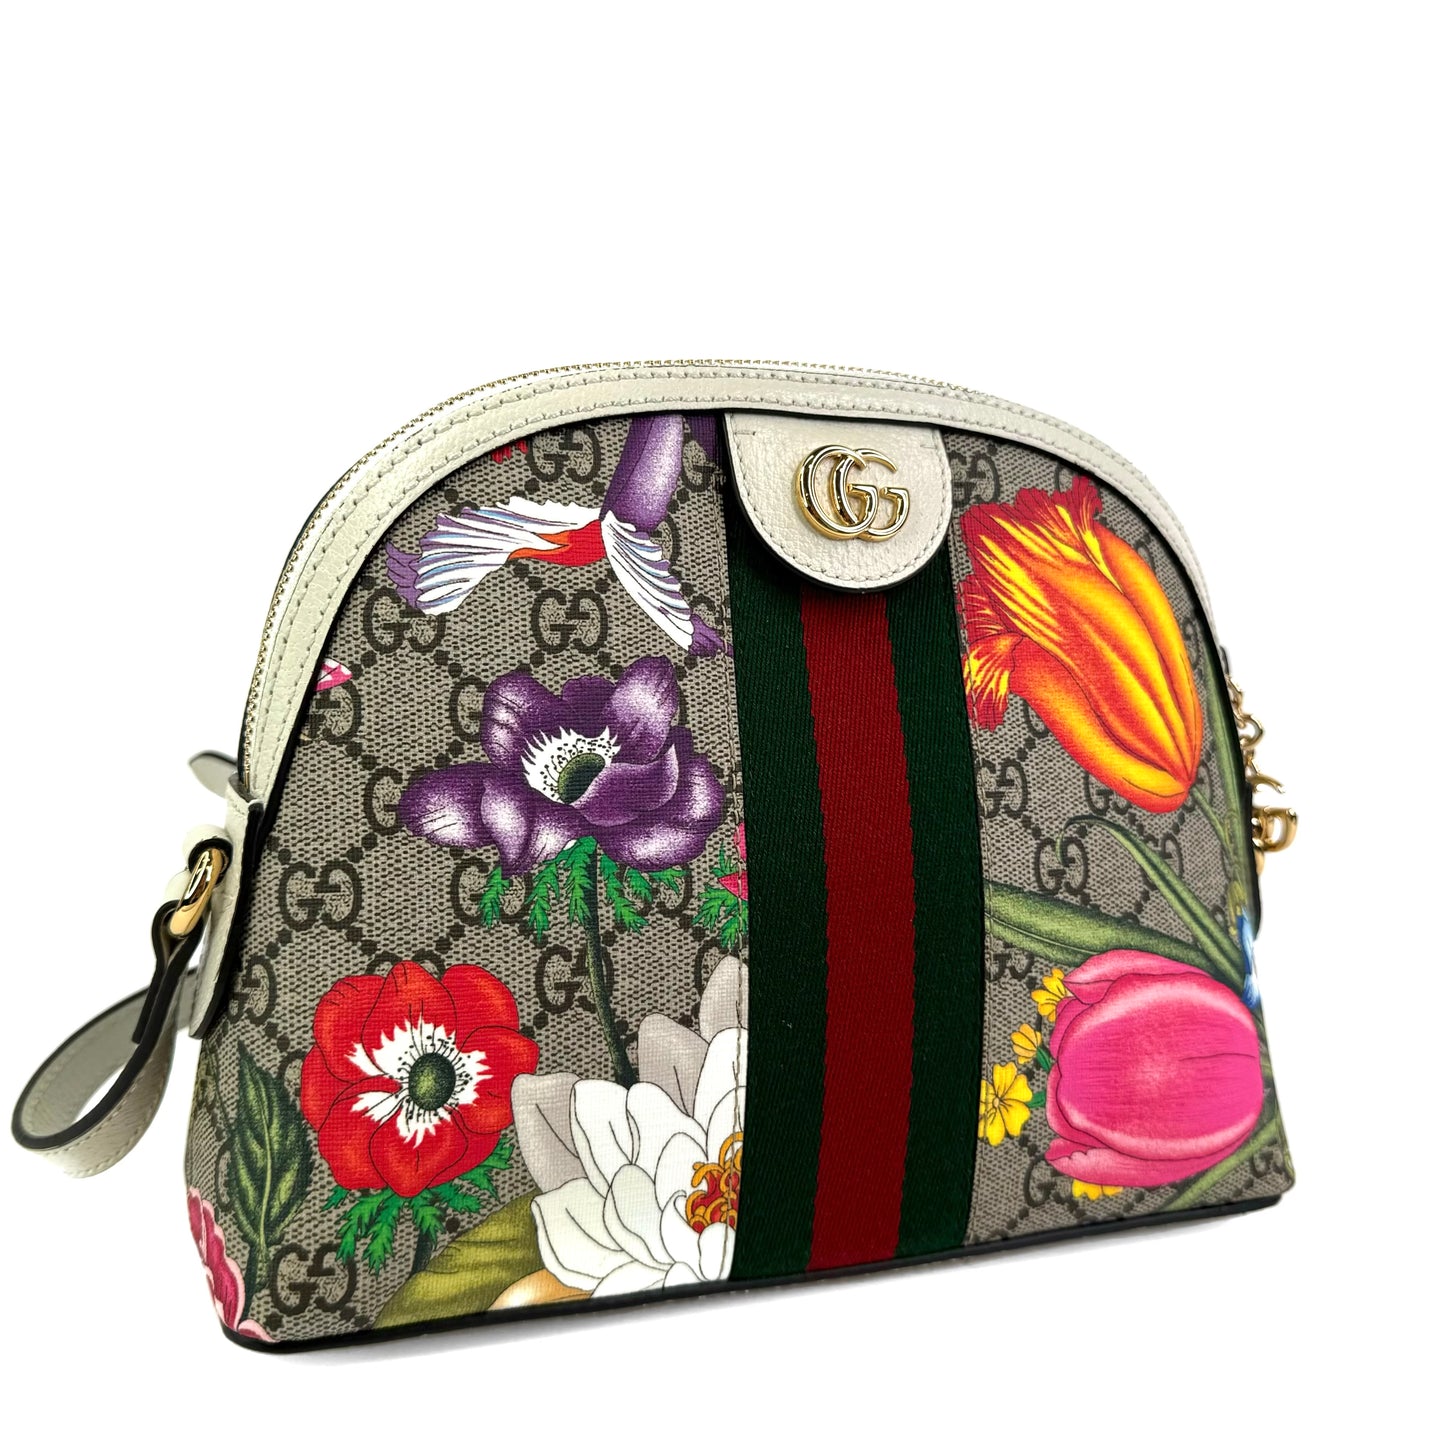 Gucci Dome Ophidia Floral Small Bag